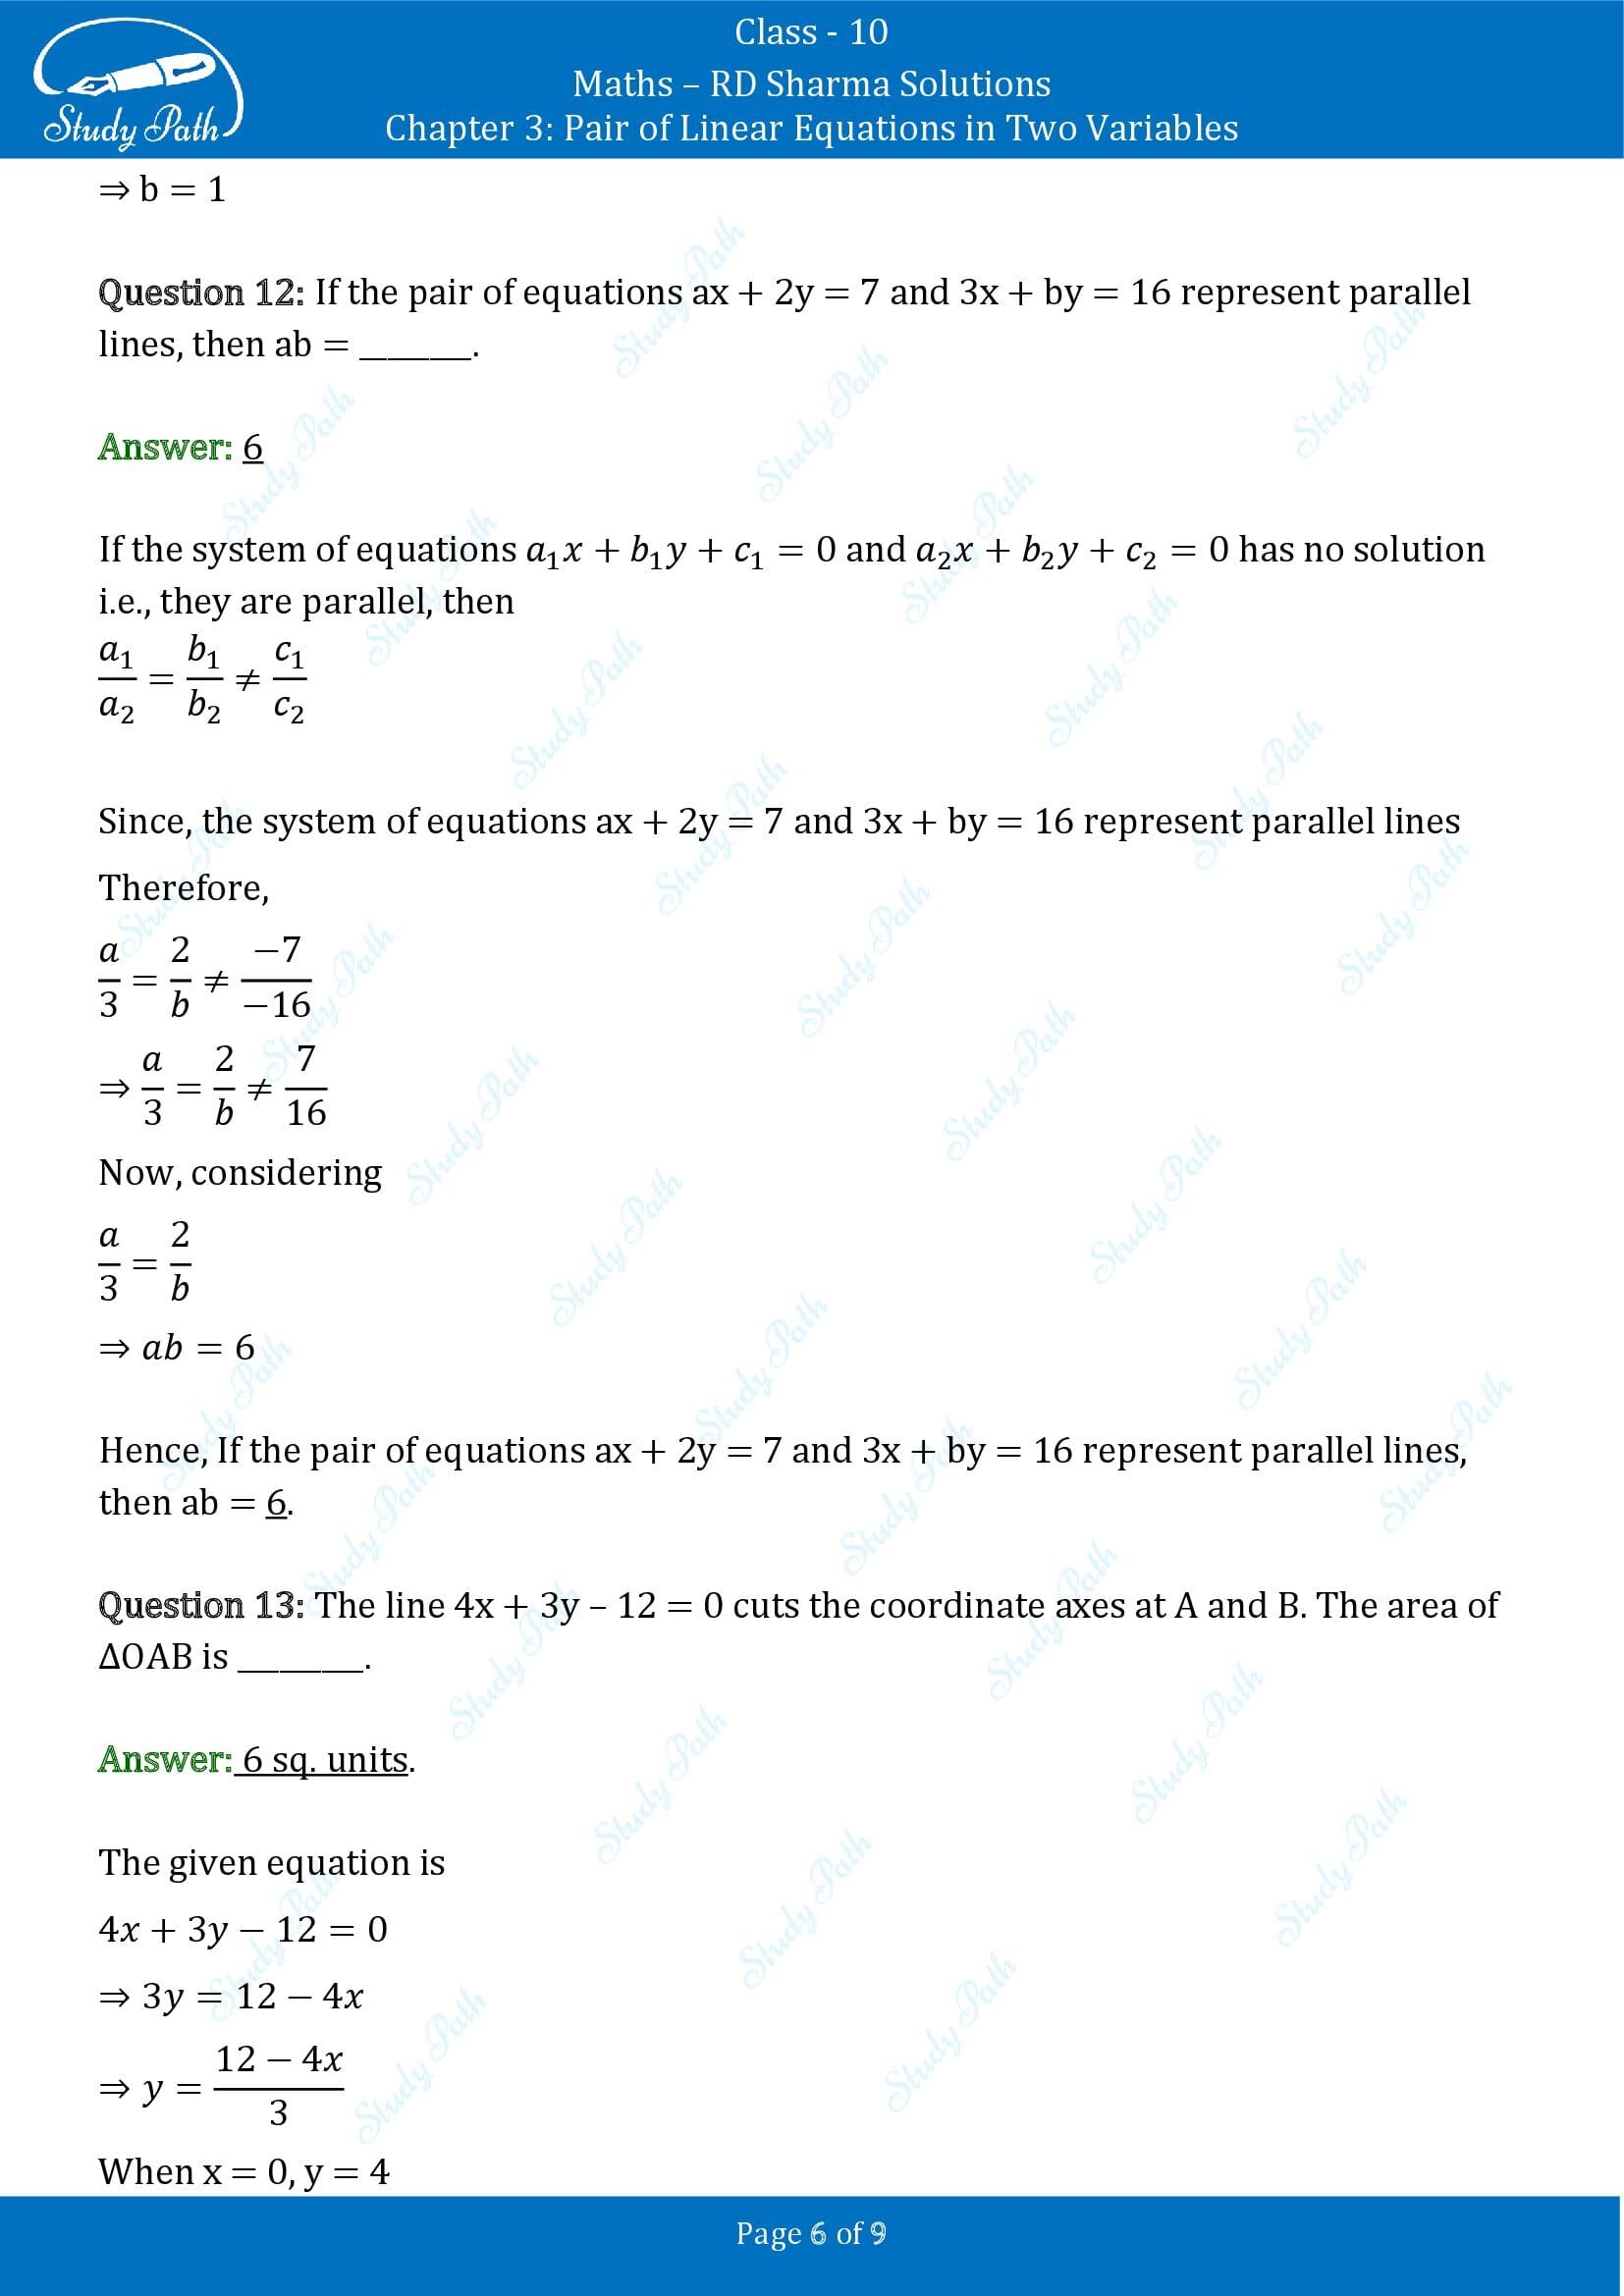 RD Sharma Solutions Class 10 Chapter 3 Pair of Linear Equations in Two Variables Exercise Fill in the Blank Type Questions FBQs 00006